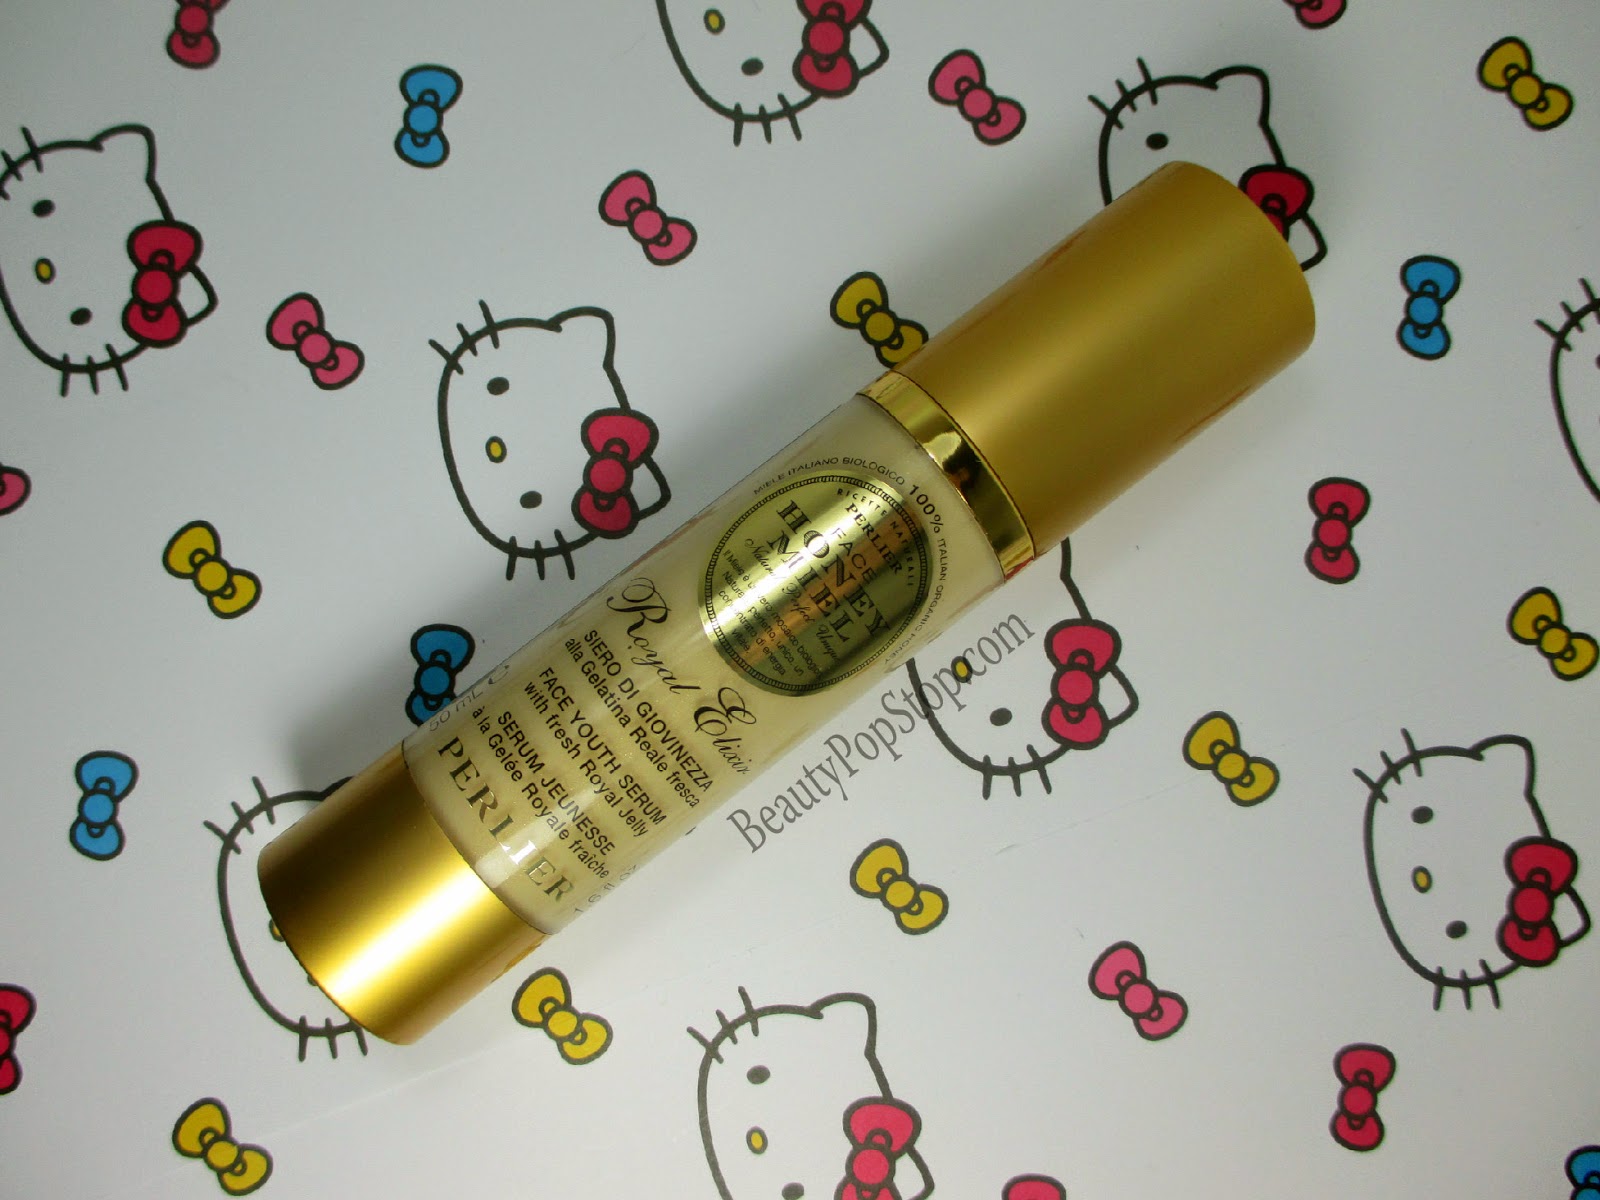 perlier royal elixir face youth serum review